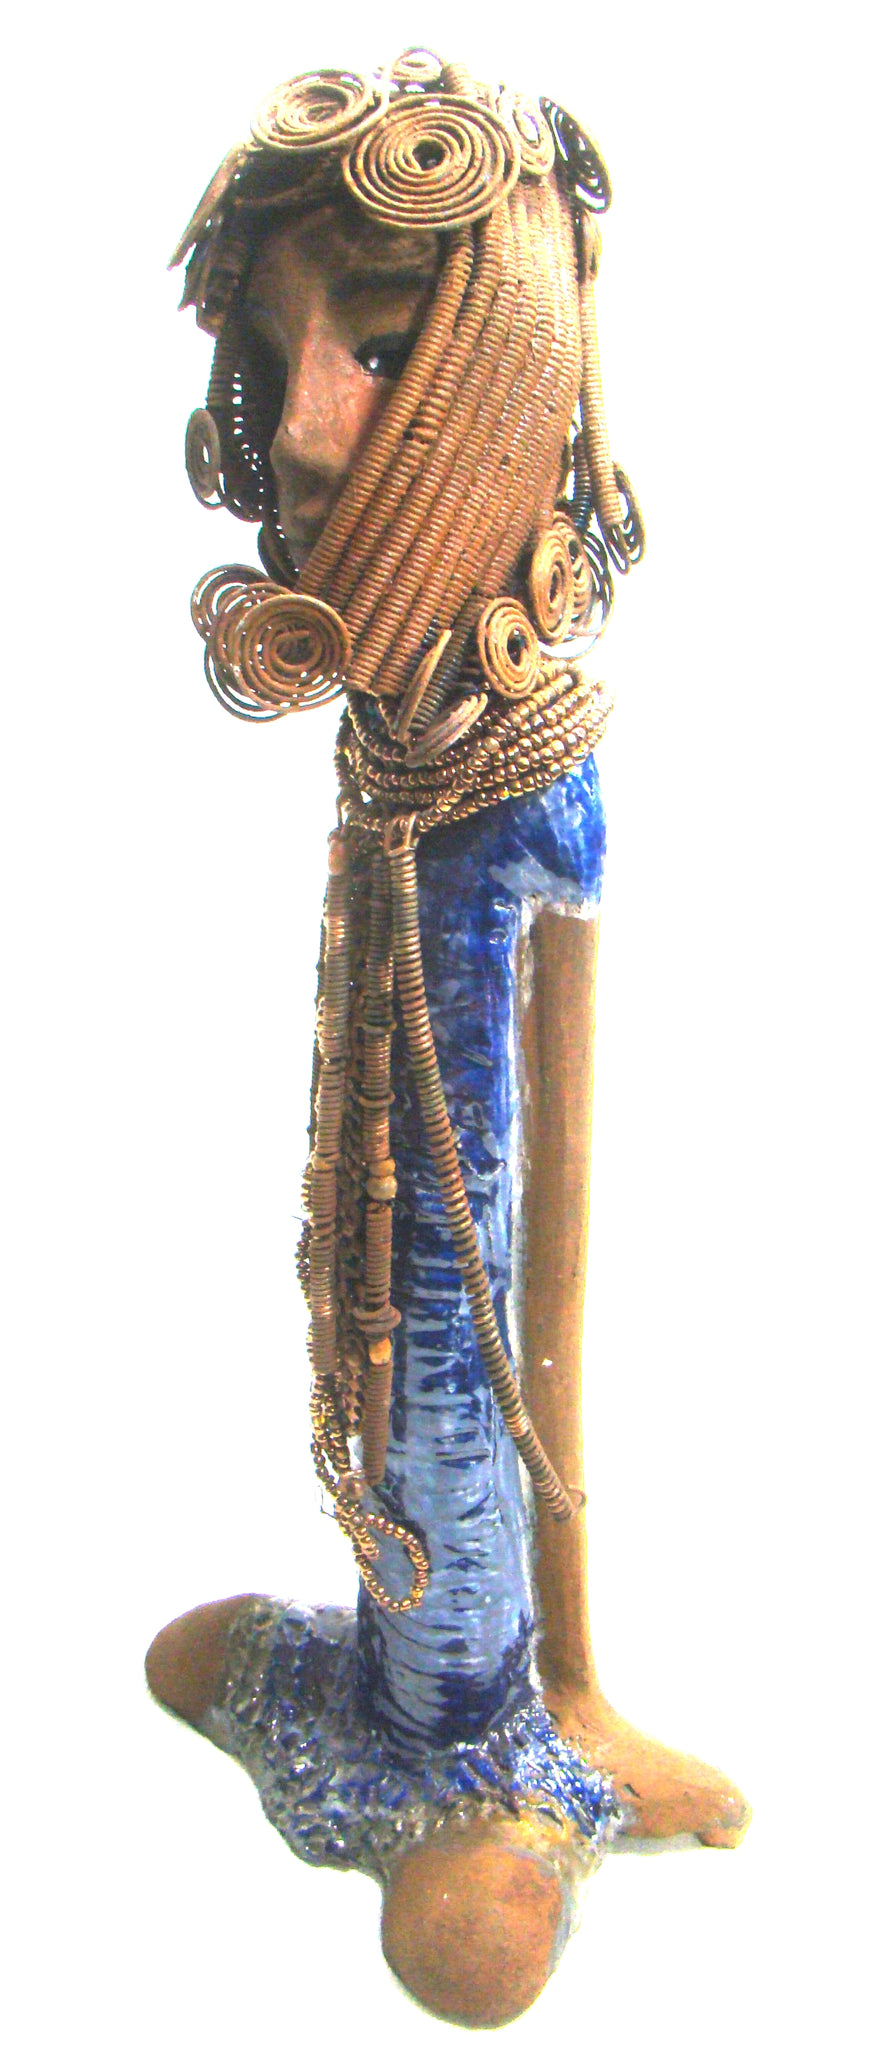      Kya stands 20" x 8" x 5" and weighs 6.04 lbs.     She has a lovely honey brown complexion.     Kya has over 40 feet of rust wire coils and spiral hair.     Her dress is a metallic blue with streaks of copper.     Her necklace is made from rust wire coils and amber beads.     Kya has long loving arms that are placed behind her.     Kya radiates like a blue diamond in the sky.     Give Kya a special place in your home!     Free Shipping!